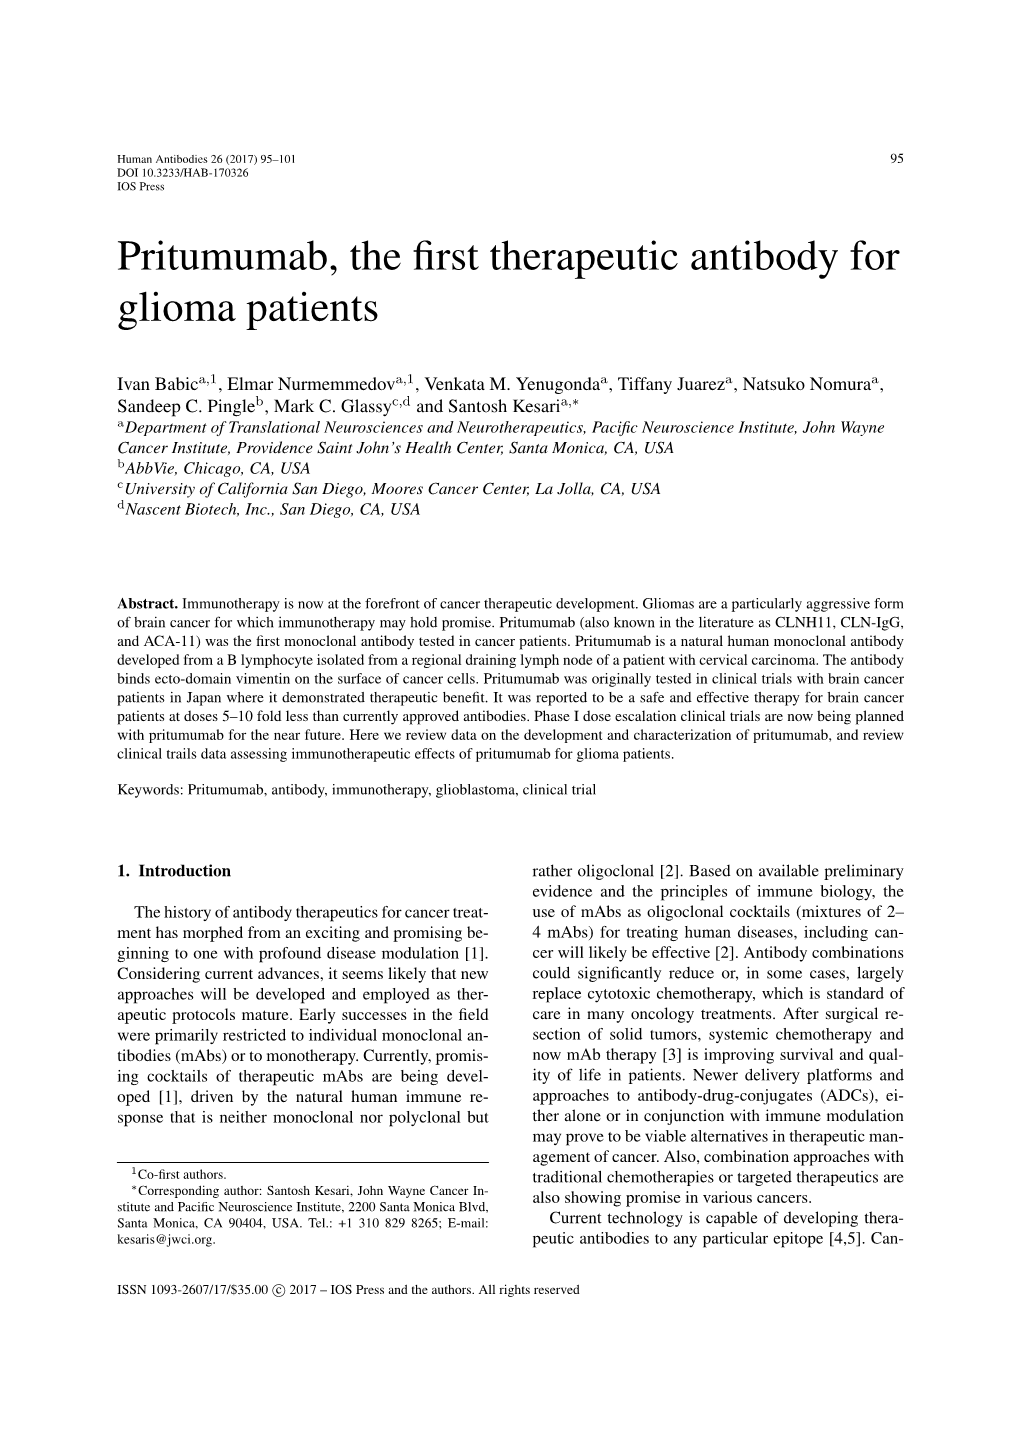 Pritumumab, the First Therapeutic Antibody for Glioma Patients